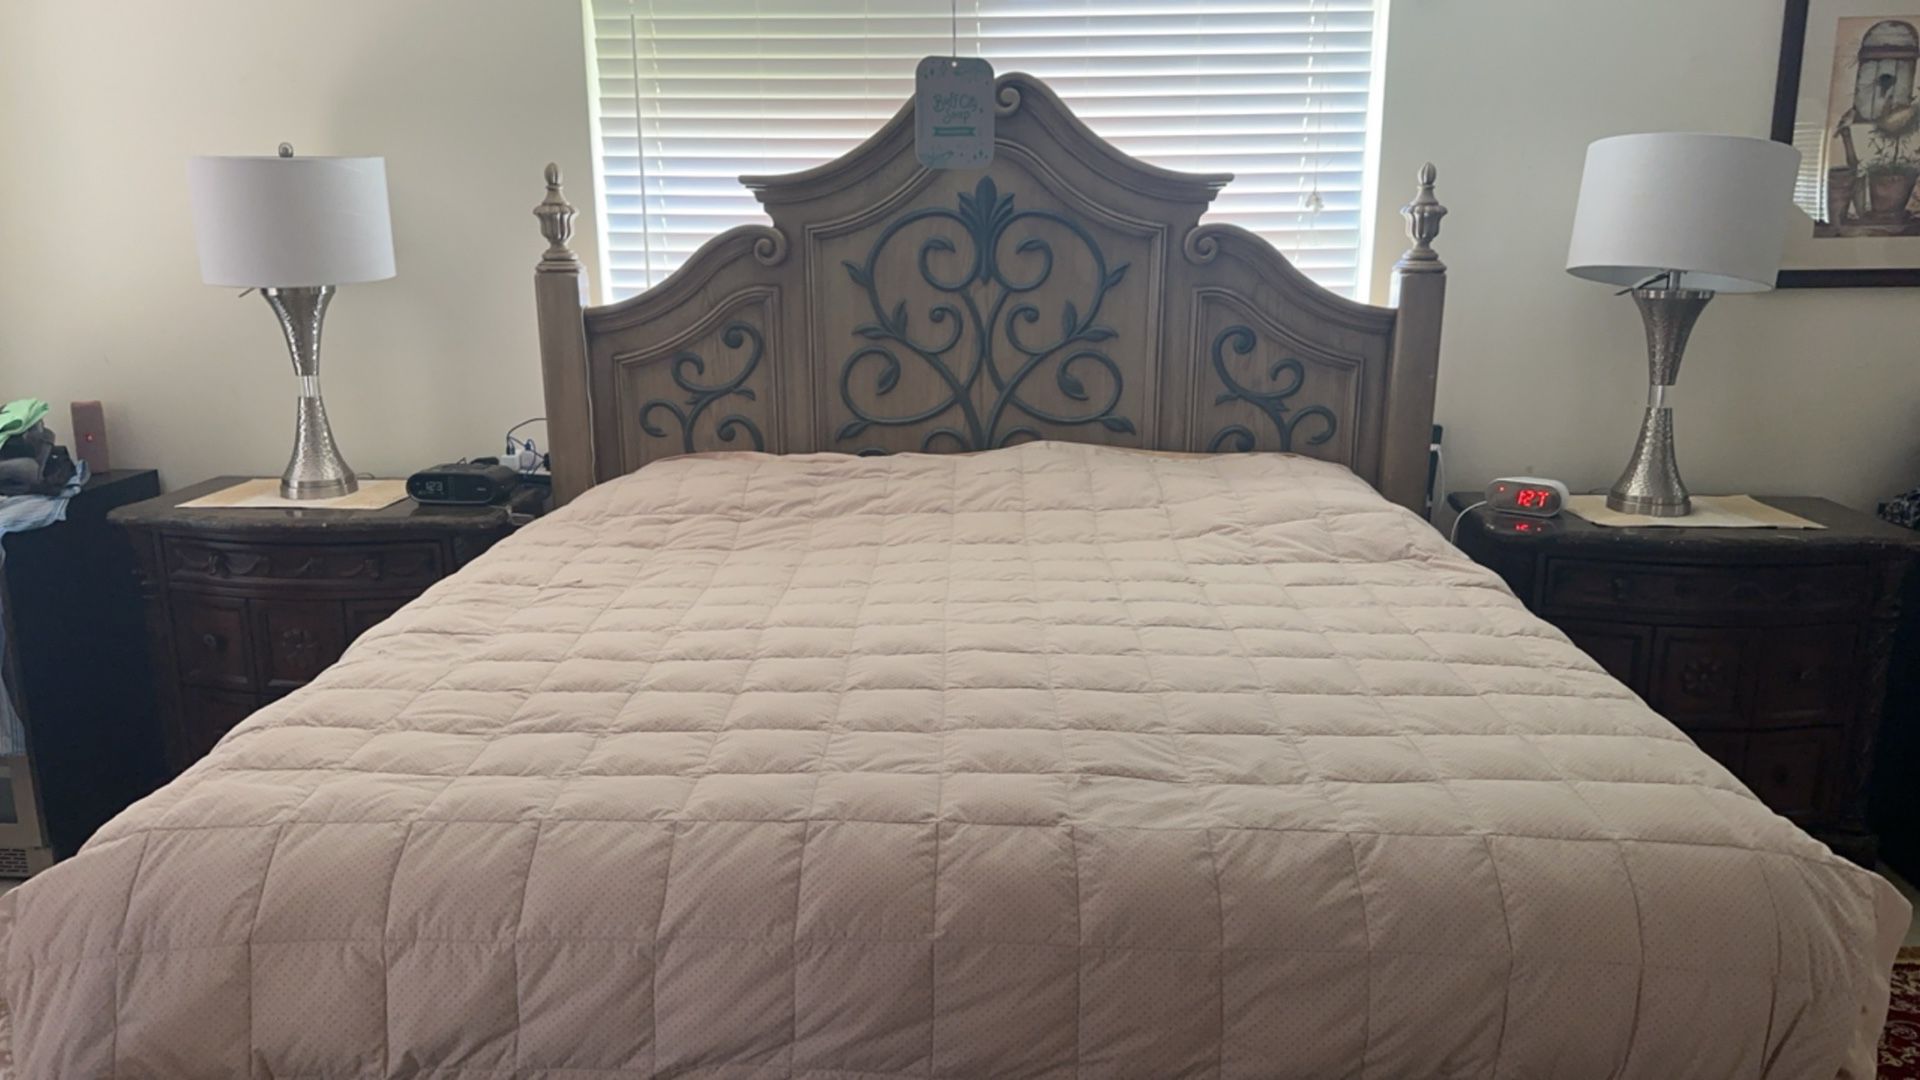 King Bed With Furniture Set (2 Dressers) 